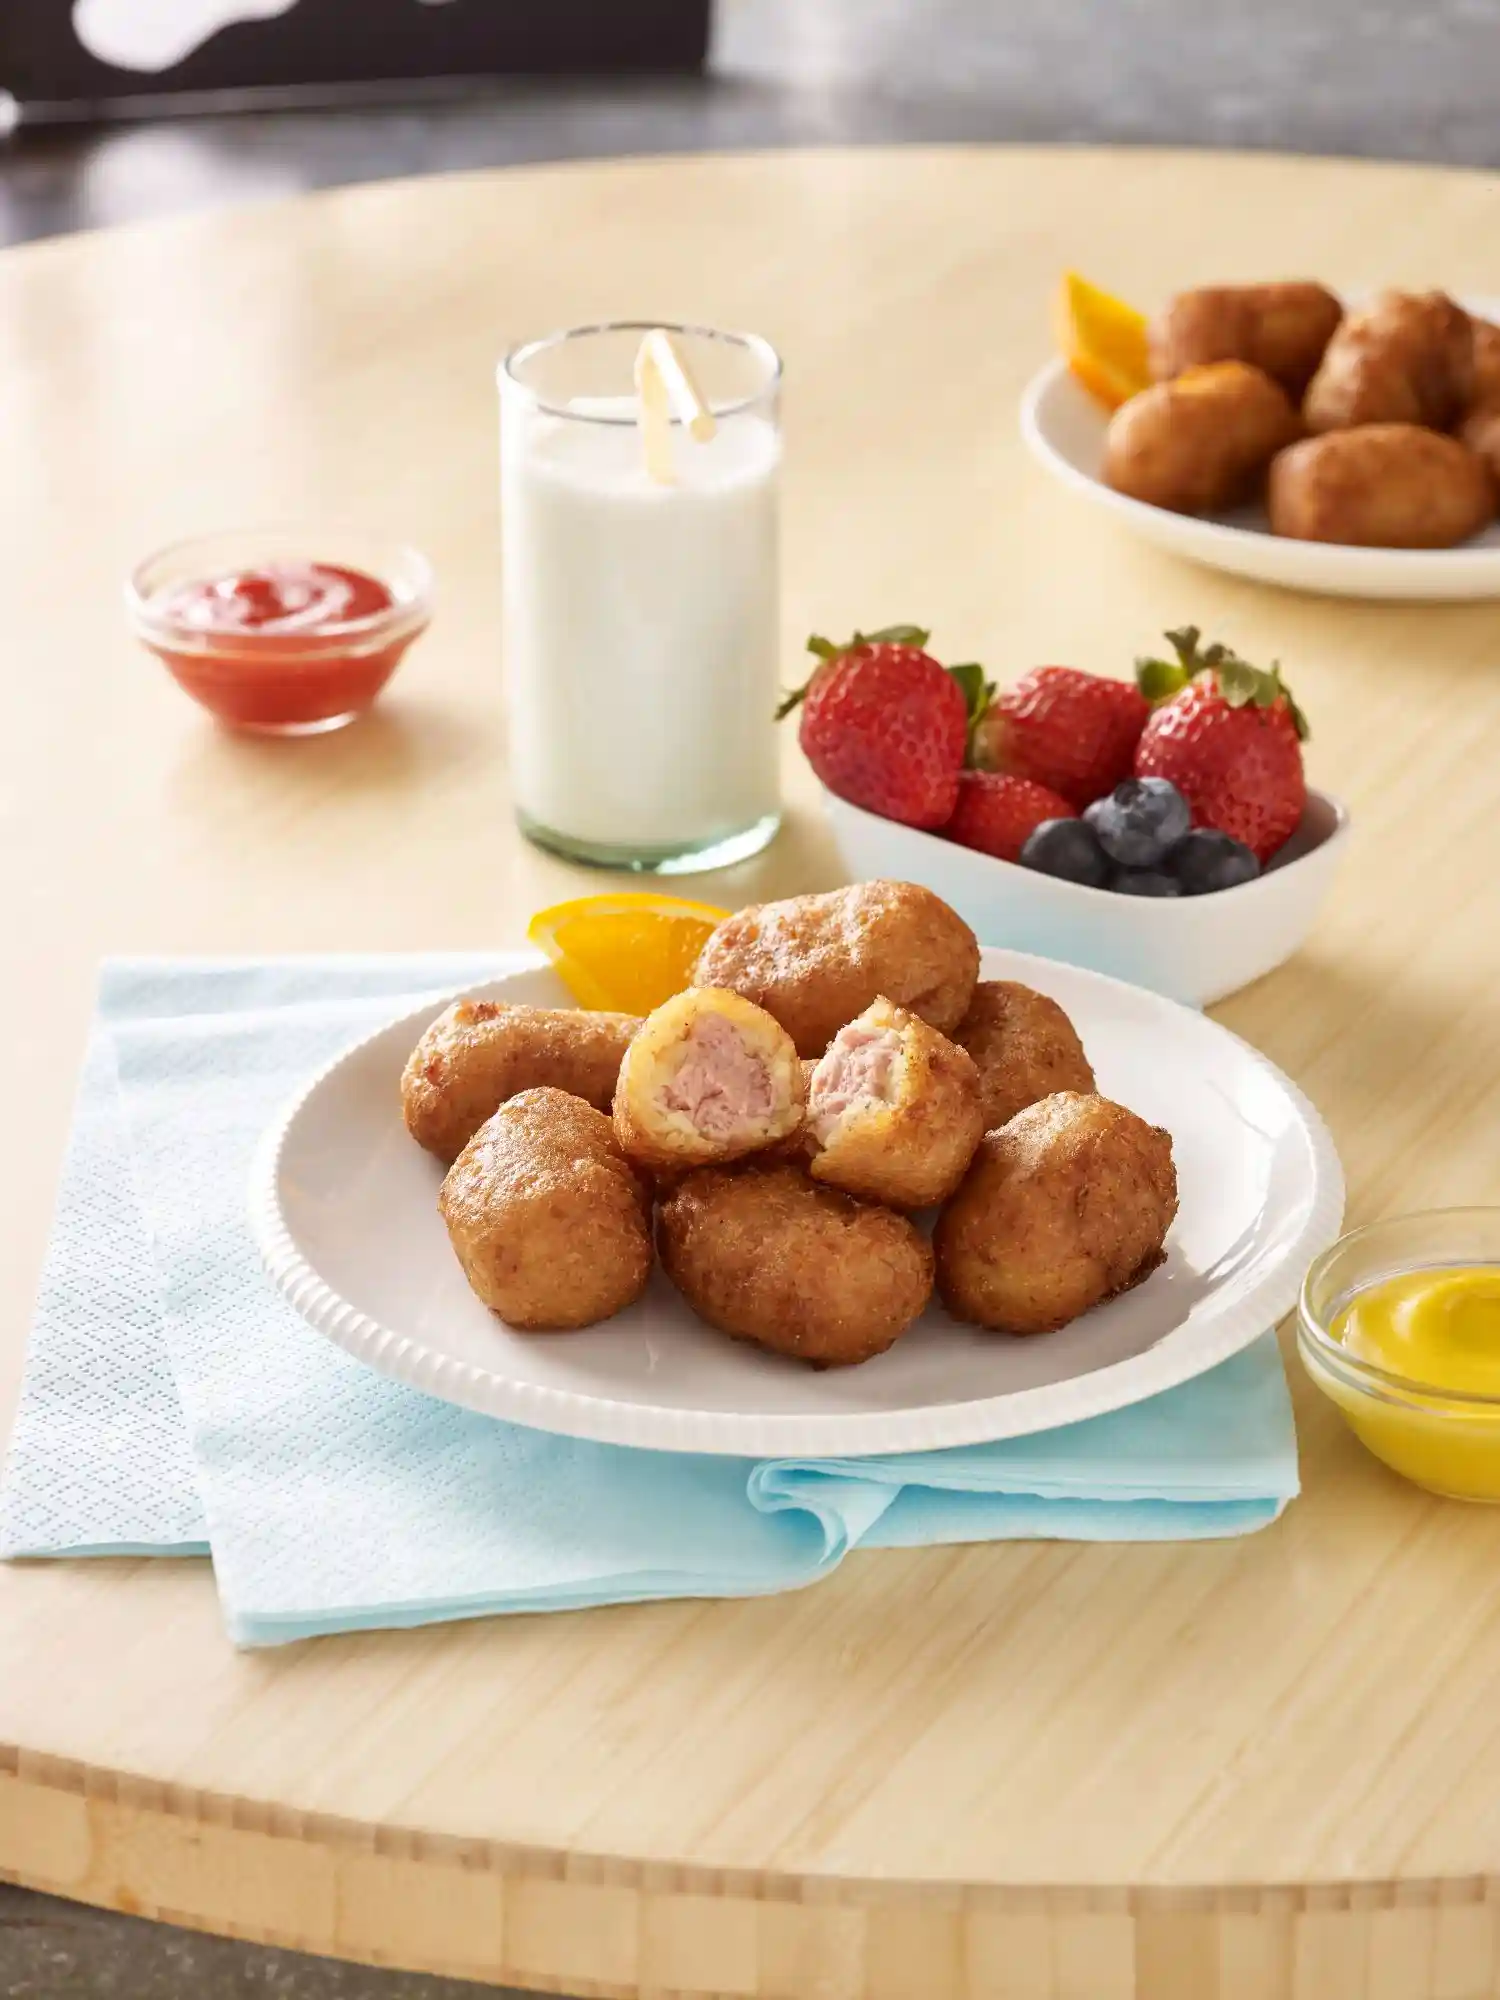 Tyson® Fully Cooked Whole Grain Breaded Mini Chicken Corn Dogs, CN, 0.67 oz. https://images.salsify.com/image/upload/s--gnZAdT6f--/q_25/qpeqigjhj6iezf98ybqt.webp